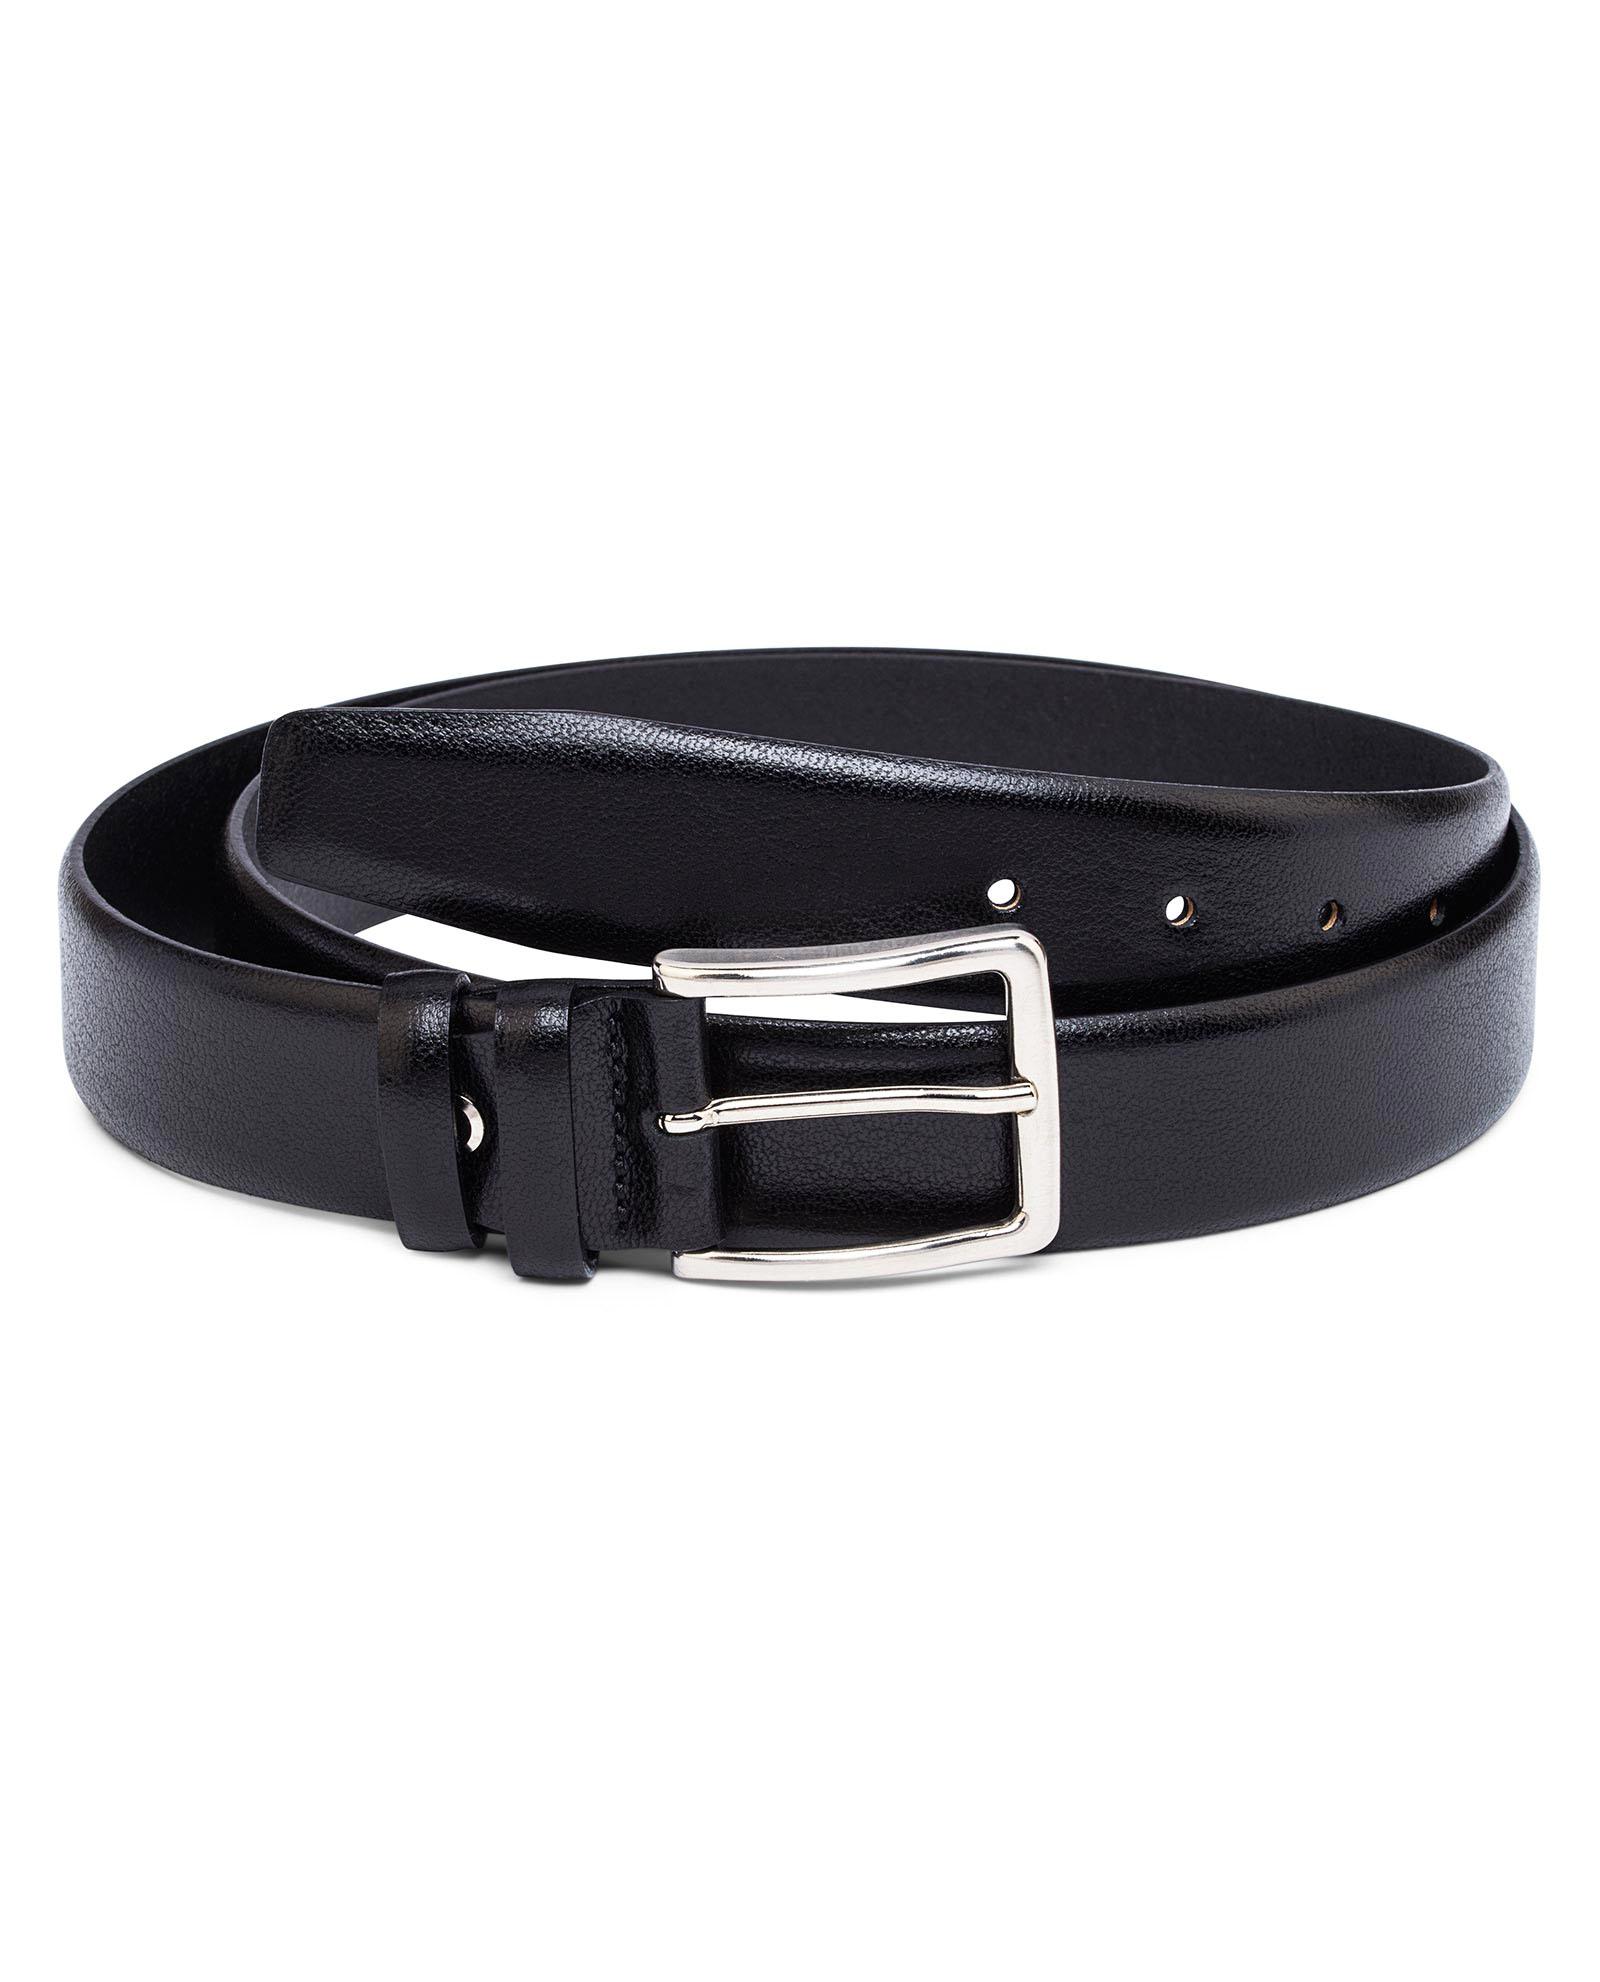 Belts Brand Leather Smooth Buckle Luxury Leather Belt Male/Female